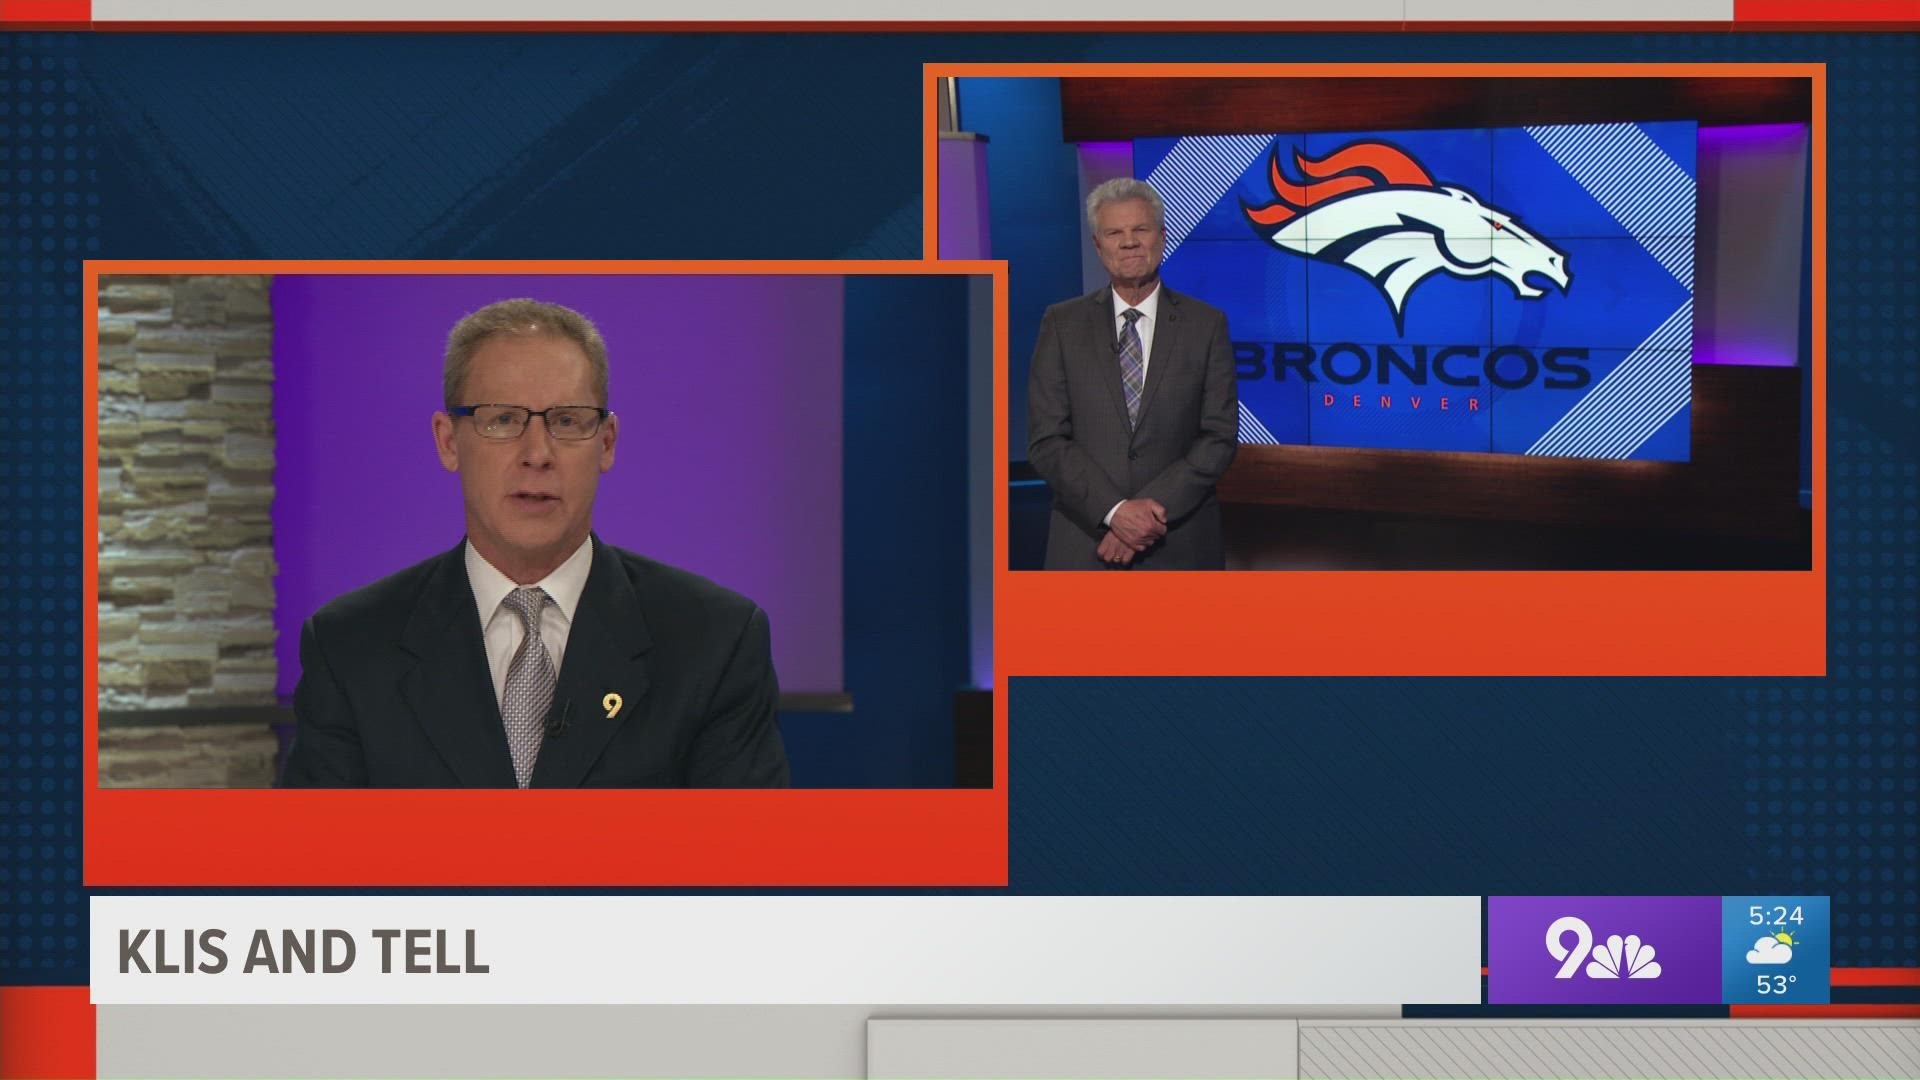 Mike Klis joined Rod Mackey to talk about potential moves the Denver Broncos could make during NFL free agency.